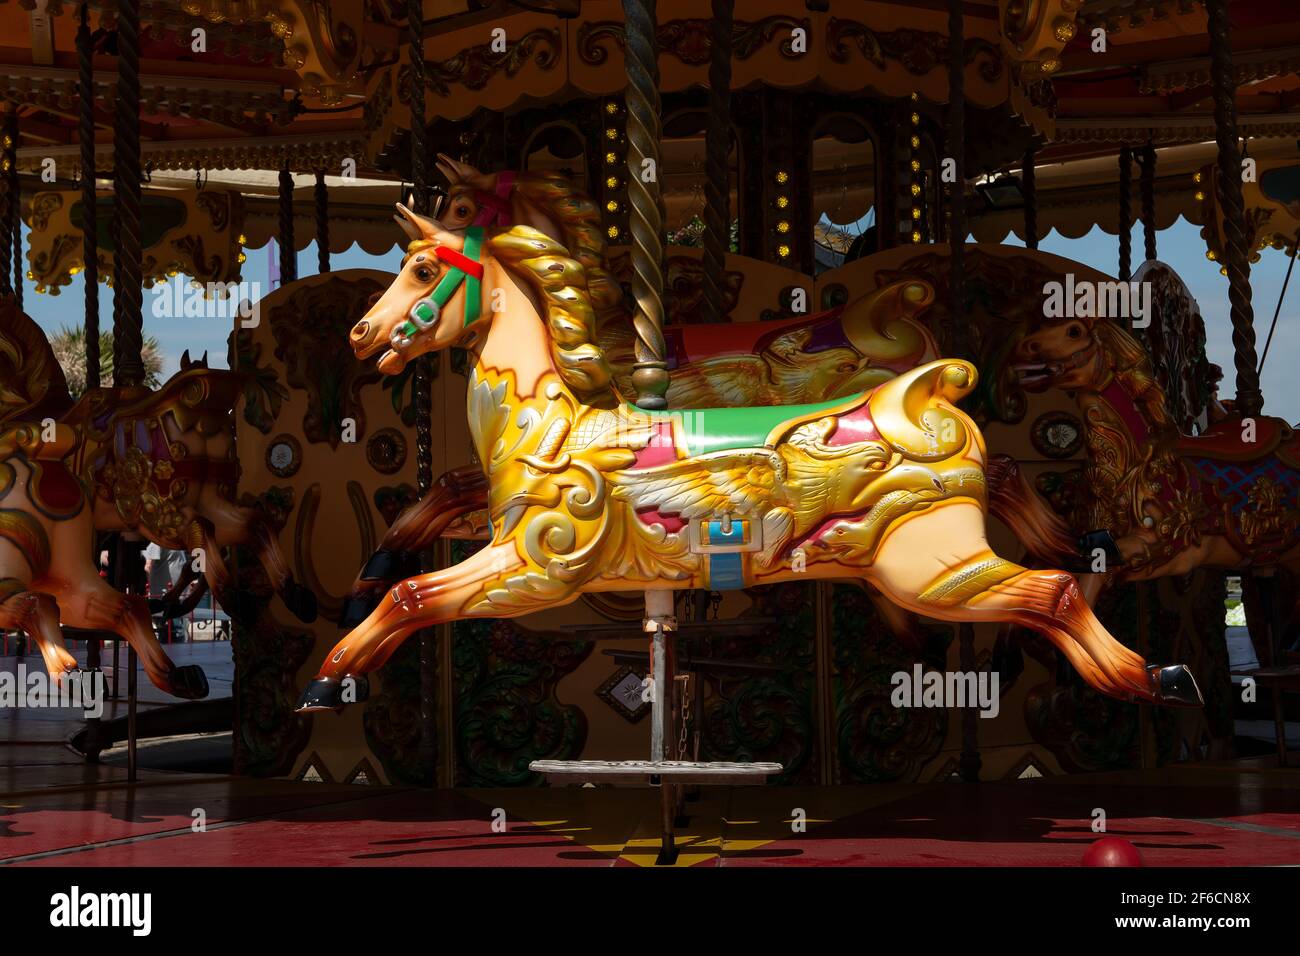 Beautiful empty colorful horse on a merry go round attraction Stock Photo